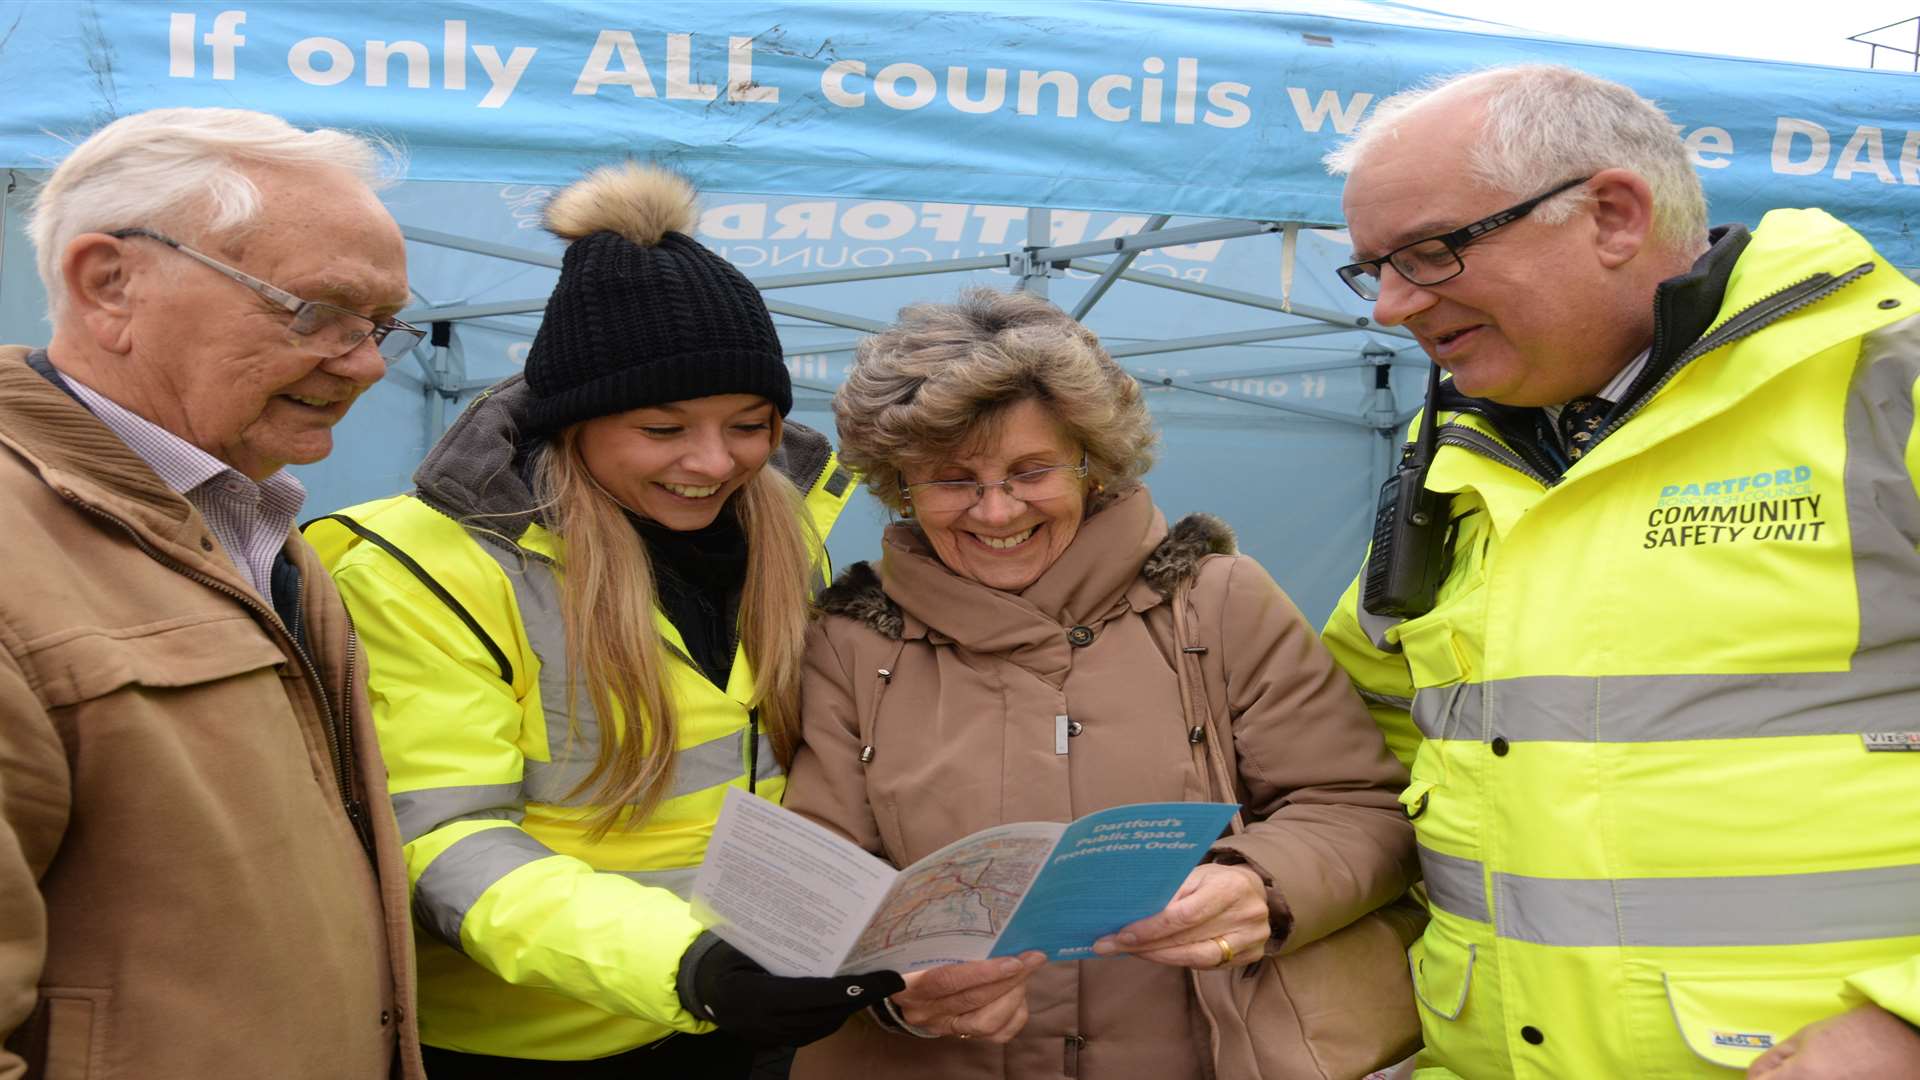 Bill and Pat Lawrence discuss community issues with Jade Ransley and Tony Henley of the community safety unit during the safety awareness day held in Dartford High Street on Thursday. Picture: Chris Davey